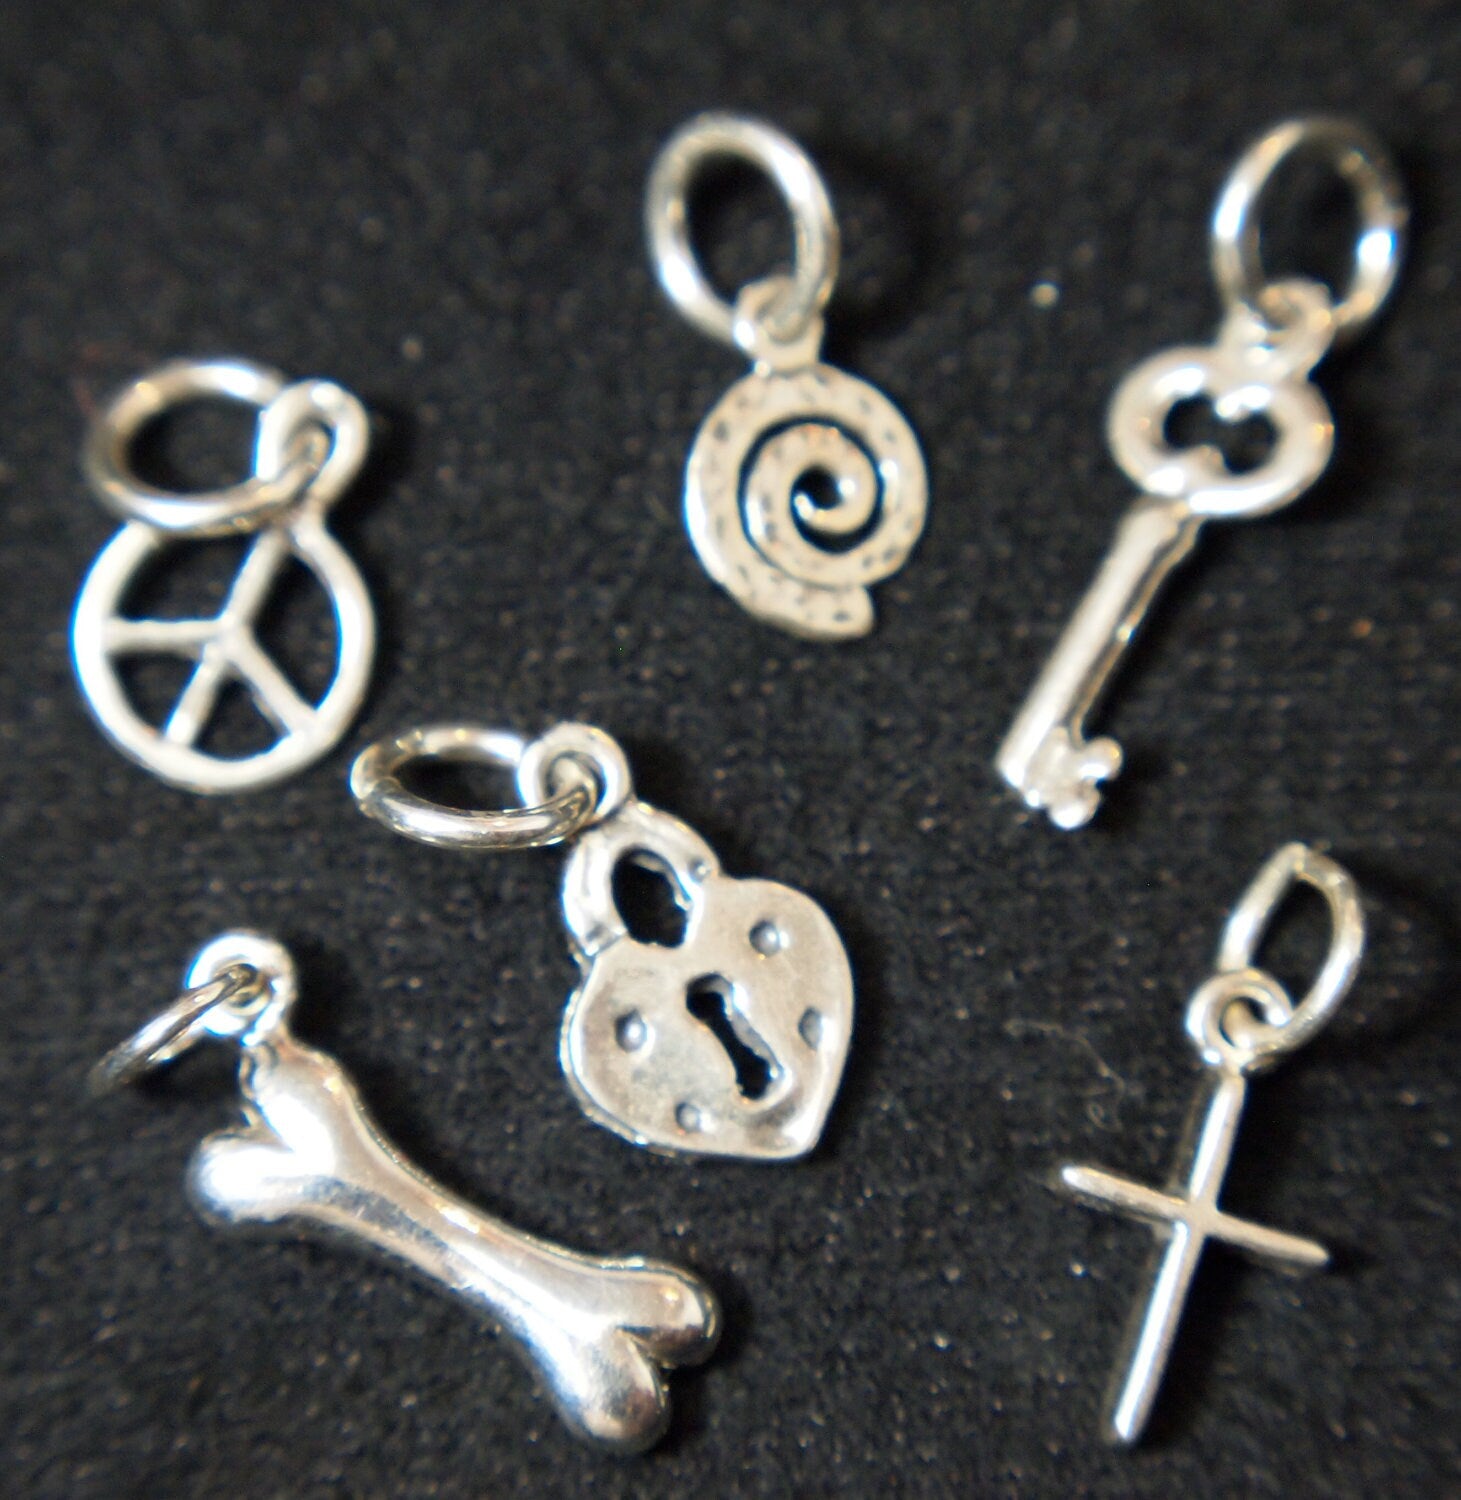 ONE Sterling Silver Charm - Sea Horse, Starfish, Sand Dollar, Fish or Turtle - Your Choice - Add on to an existing Necklace or Bracelet